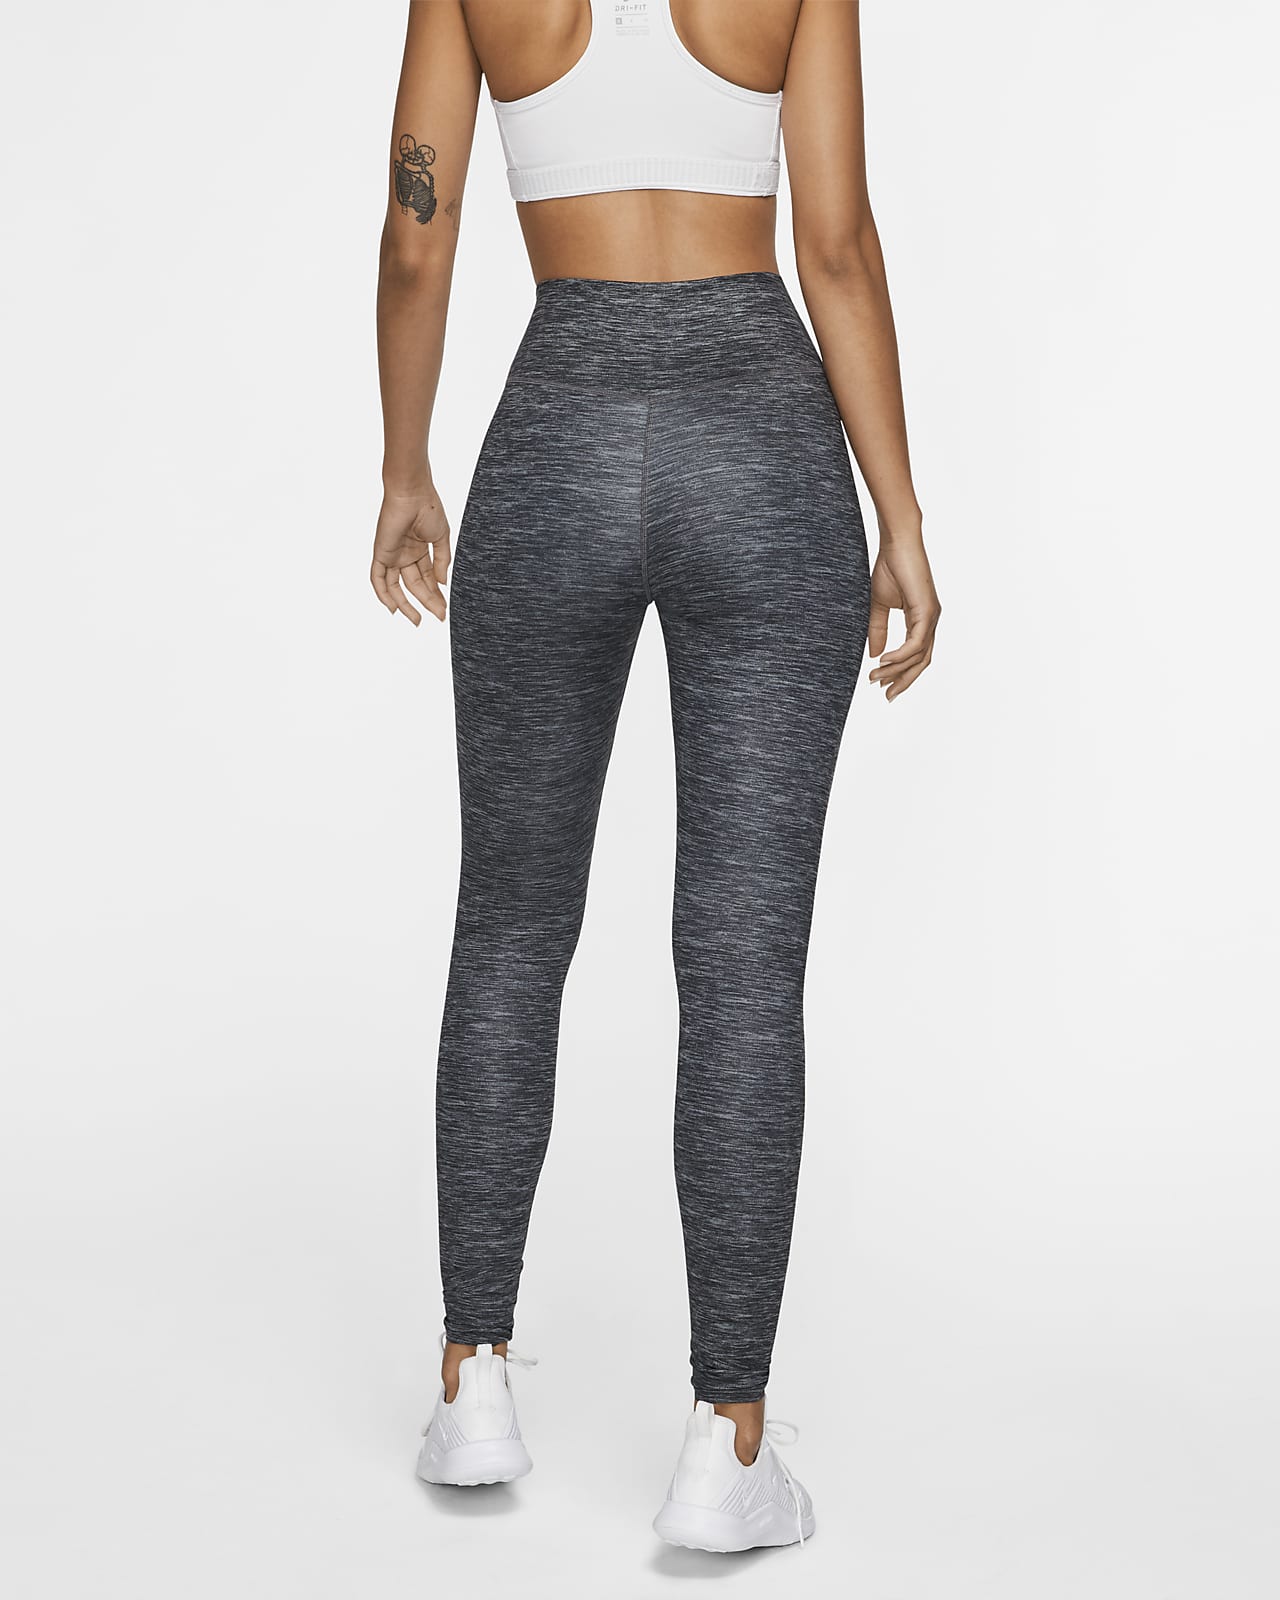 nike one luxe tights review